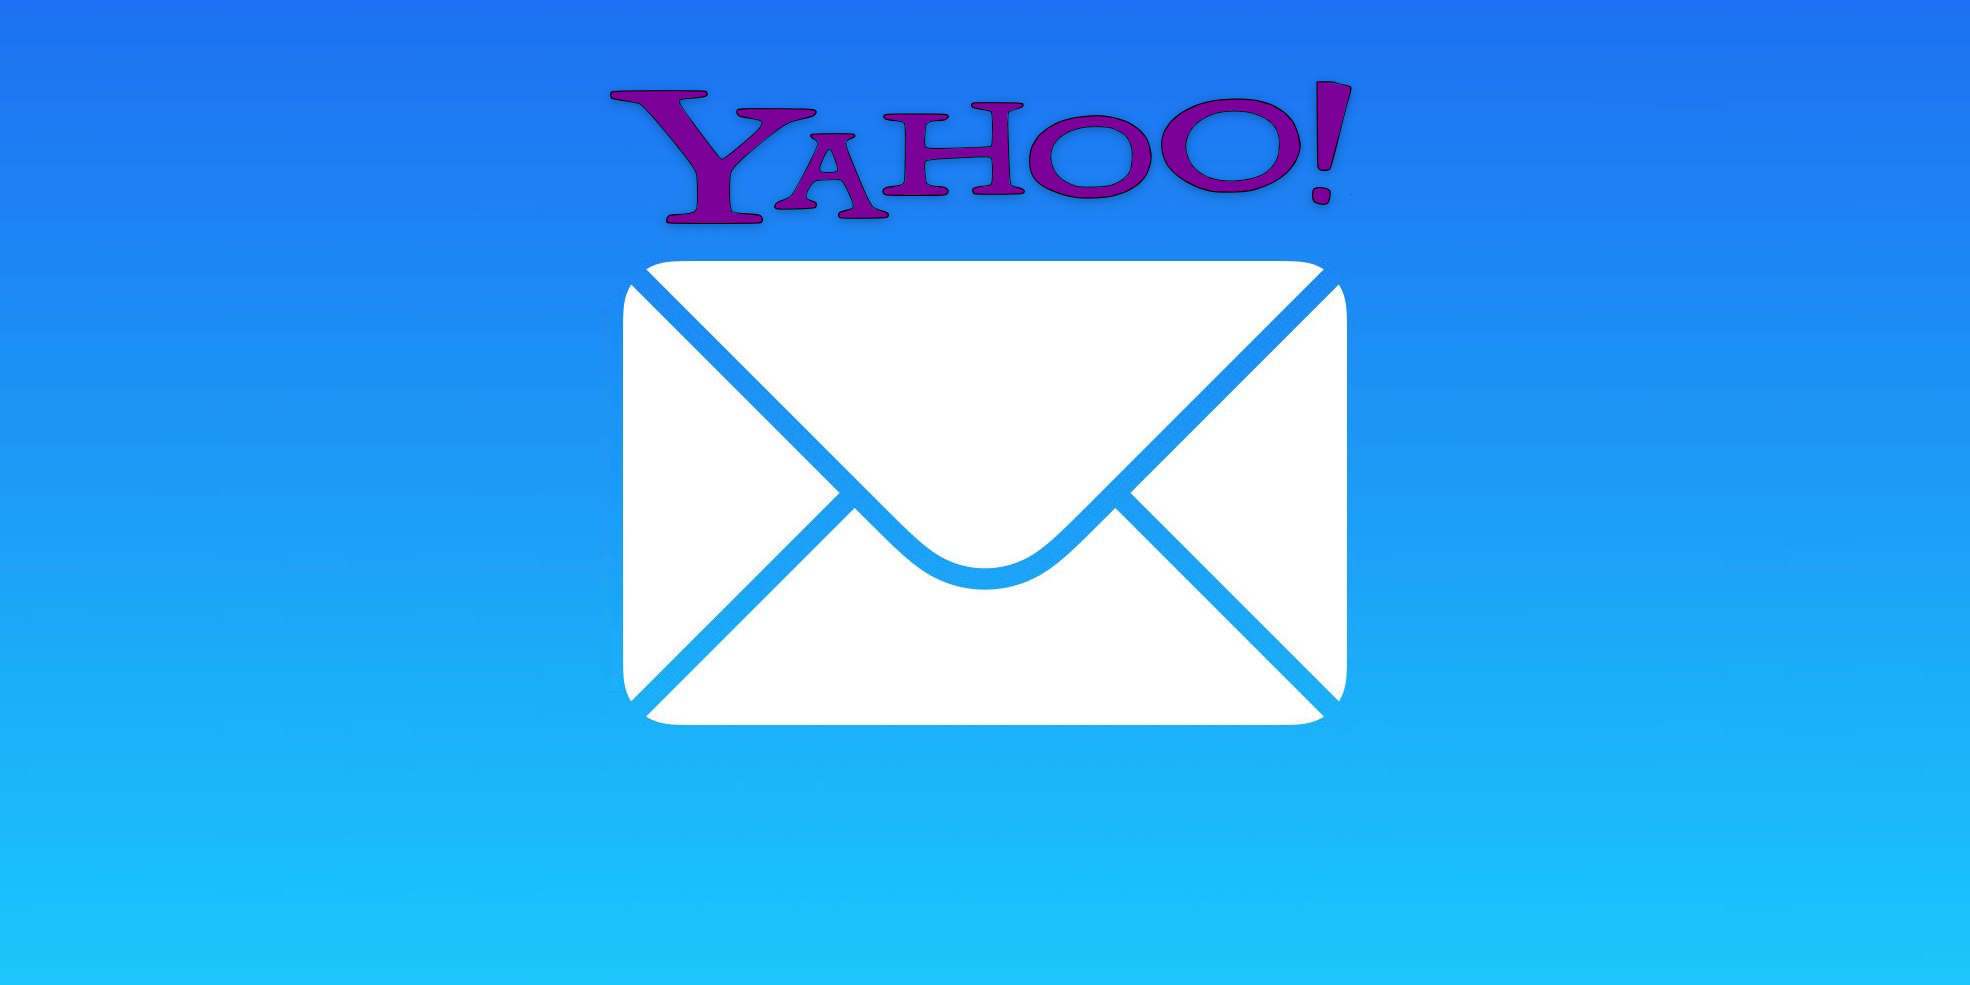 Yahoo email not working with iPhone and iPad Mail app for many users